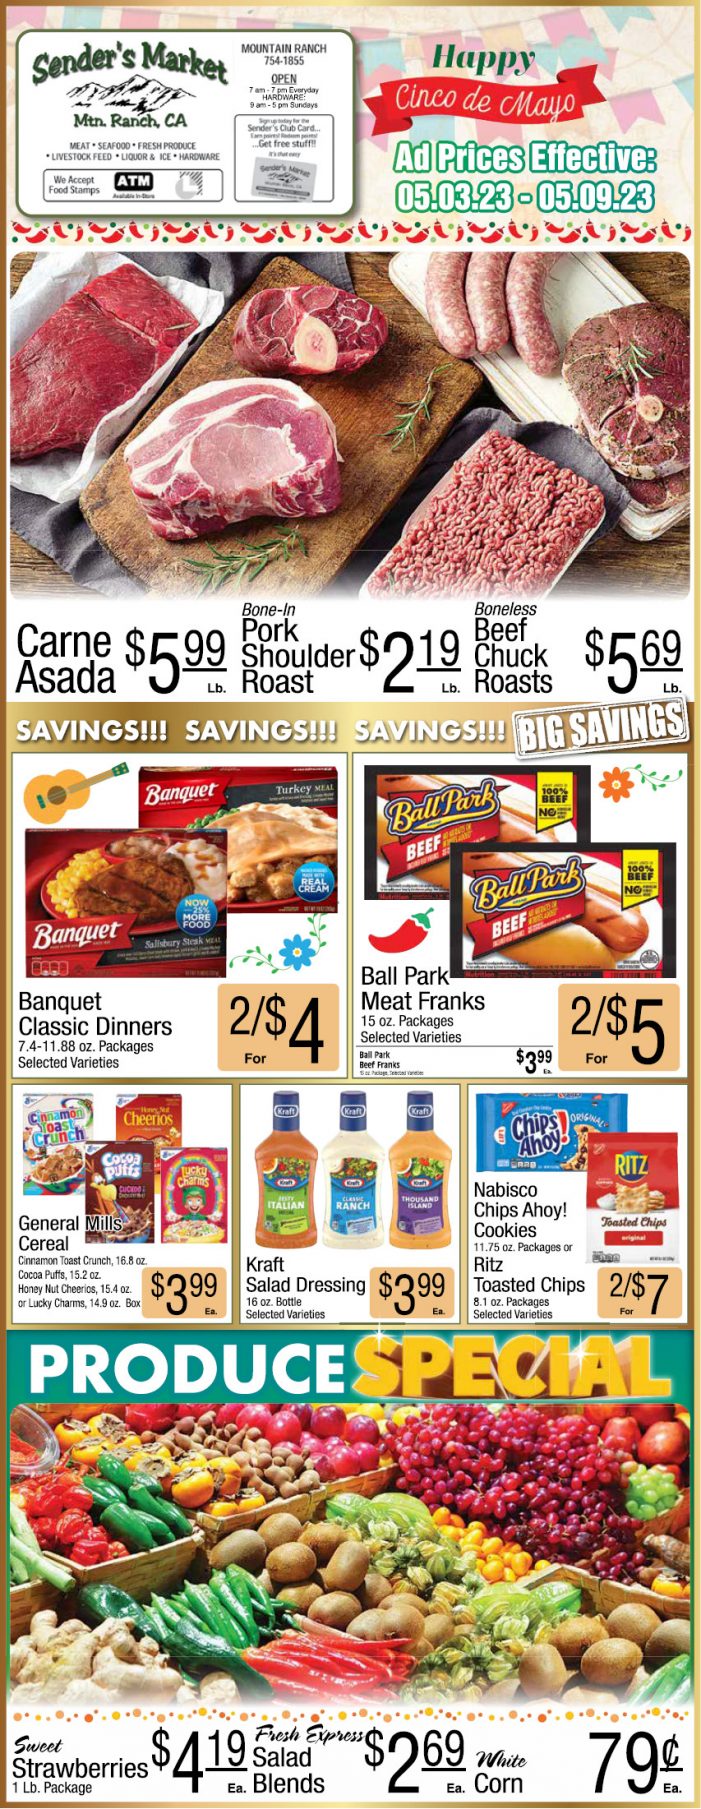 Sender’s Market Weekly Ad & Grocery Specials Through May 9th! Shop Local & Save!!